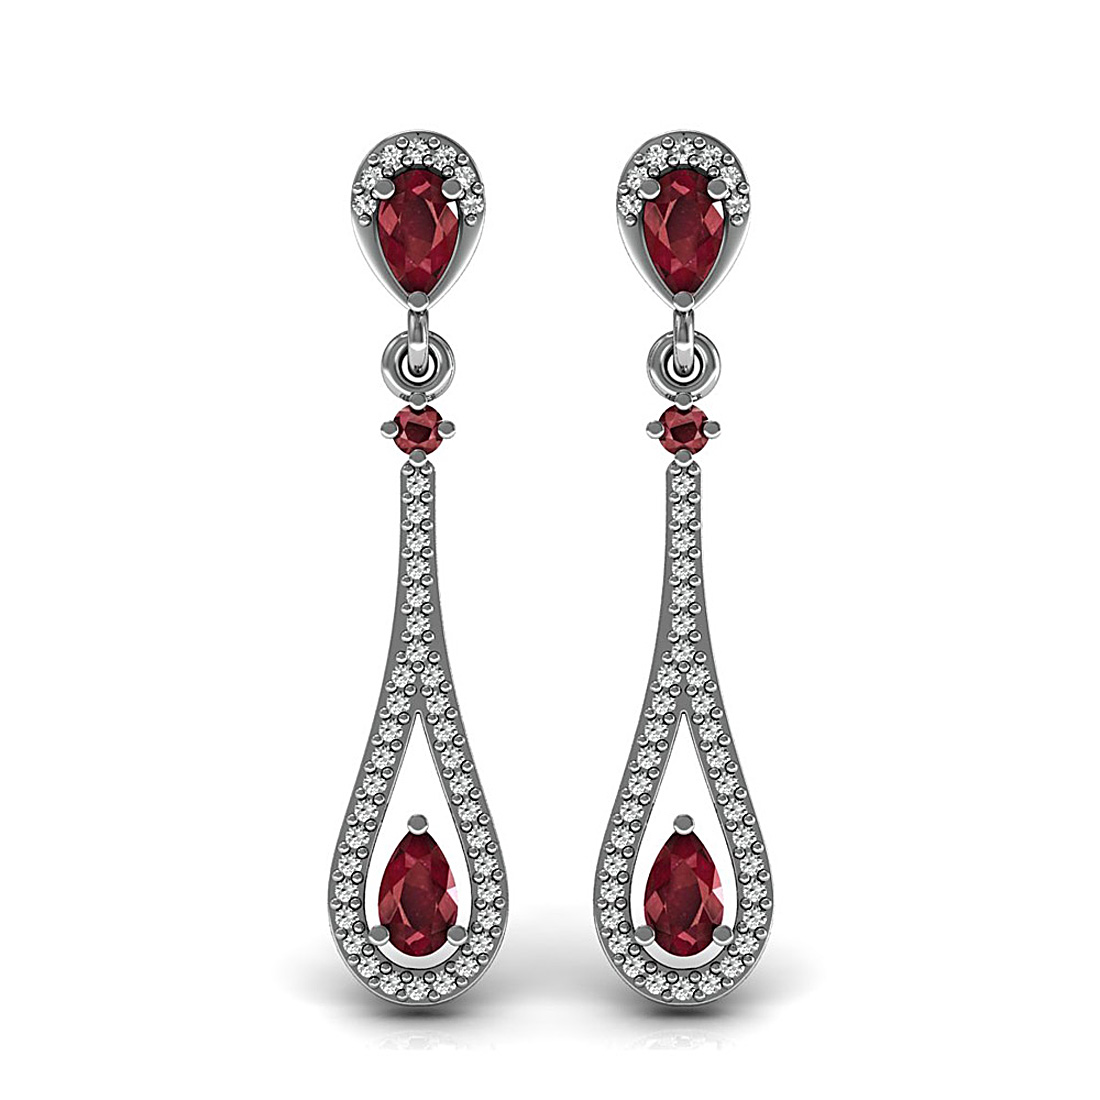 18K Solid white gold drop style dangle earrings studded with natural ruby gemstone and genuine diamond.